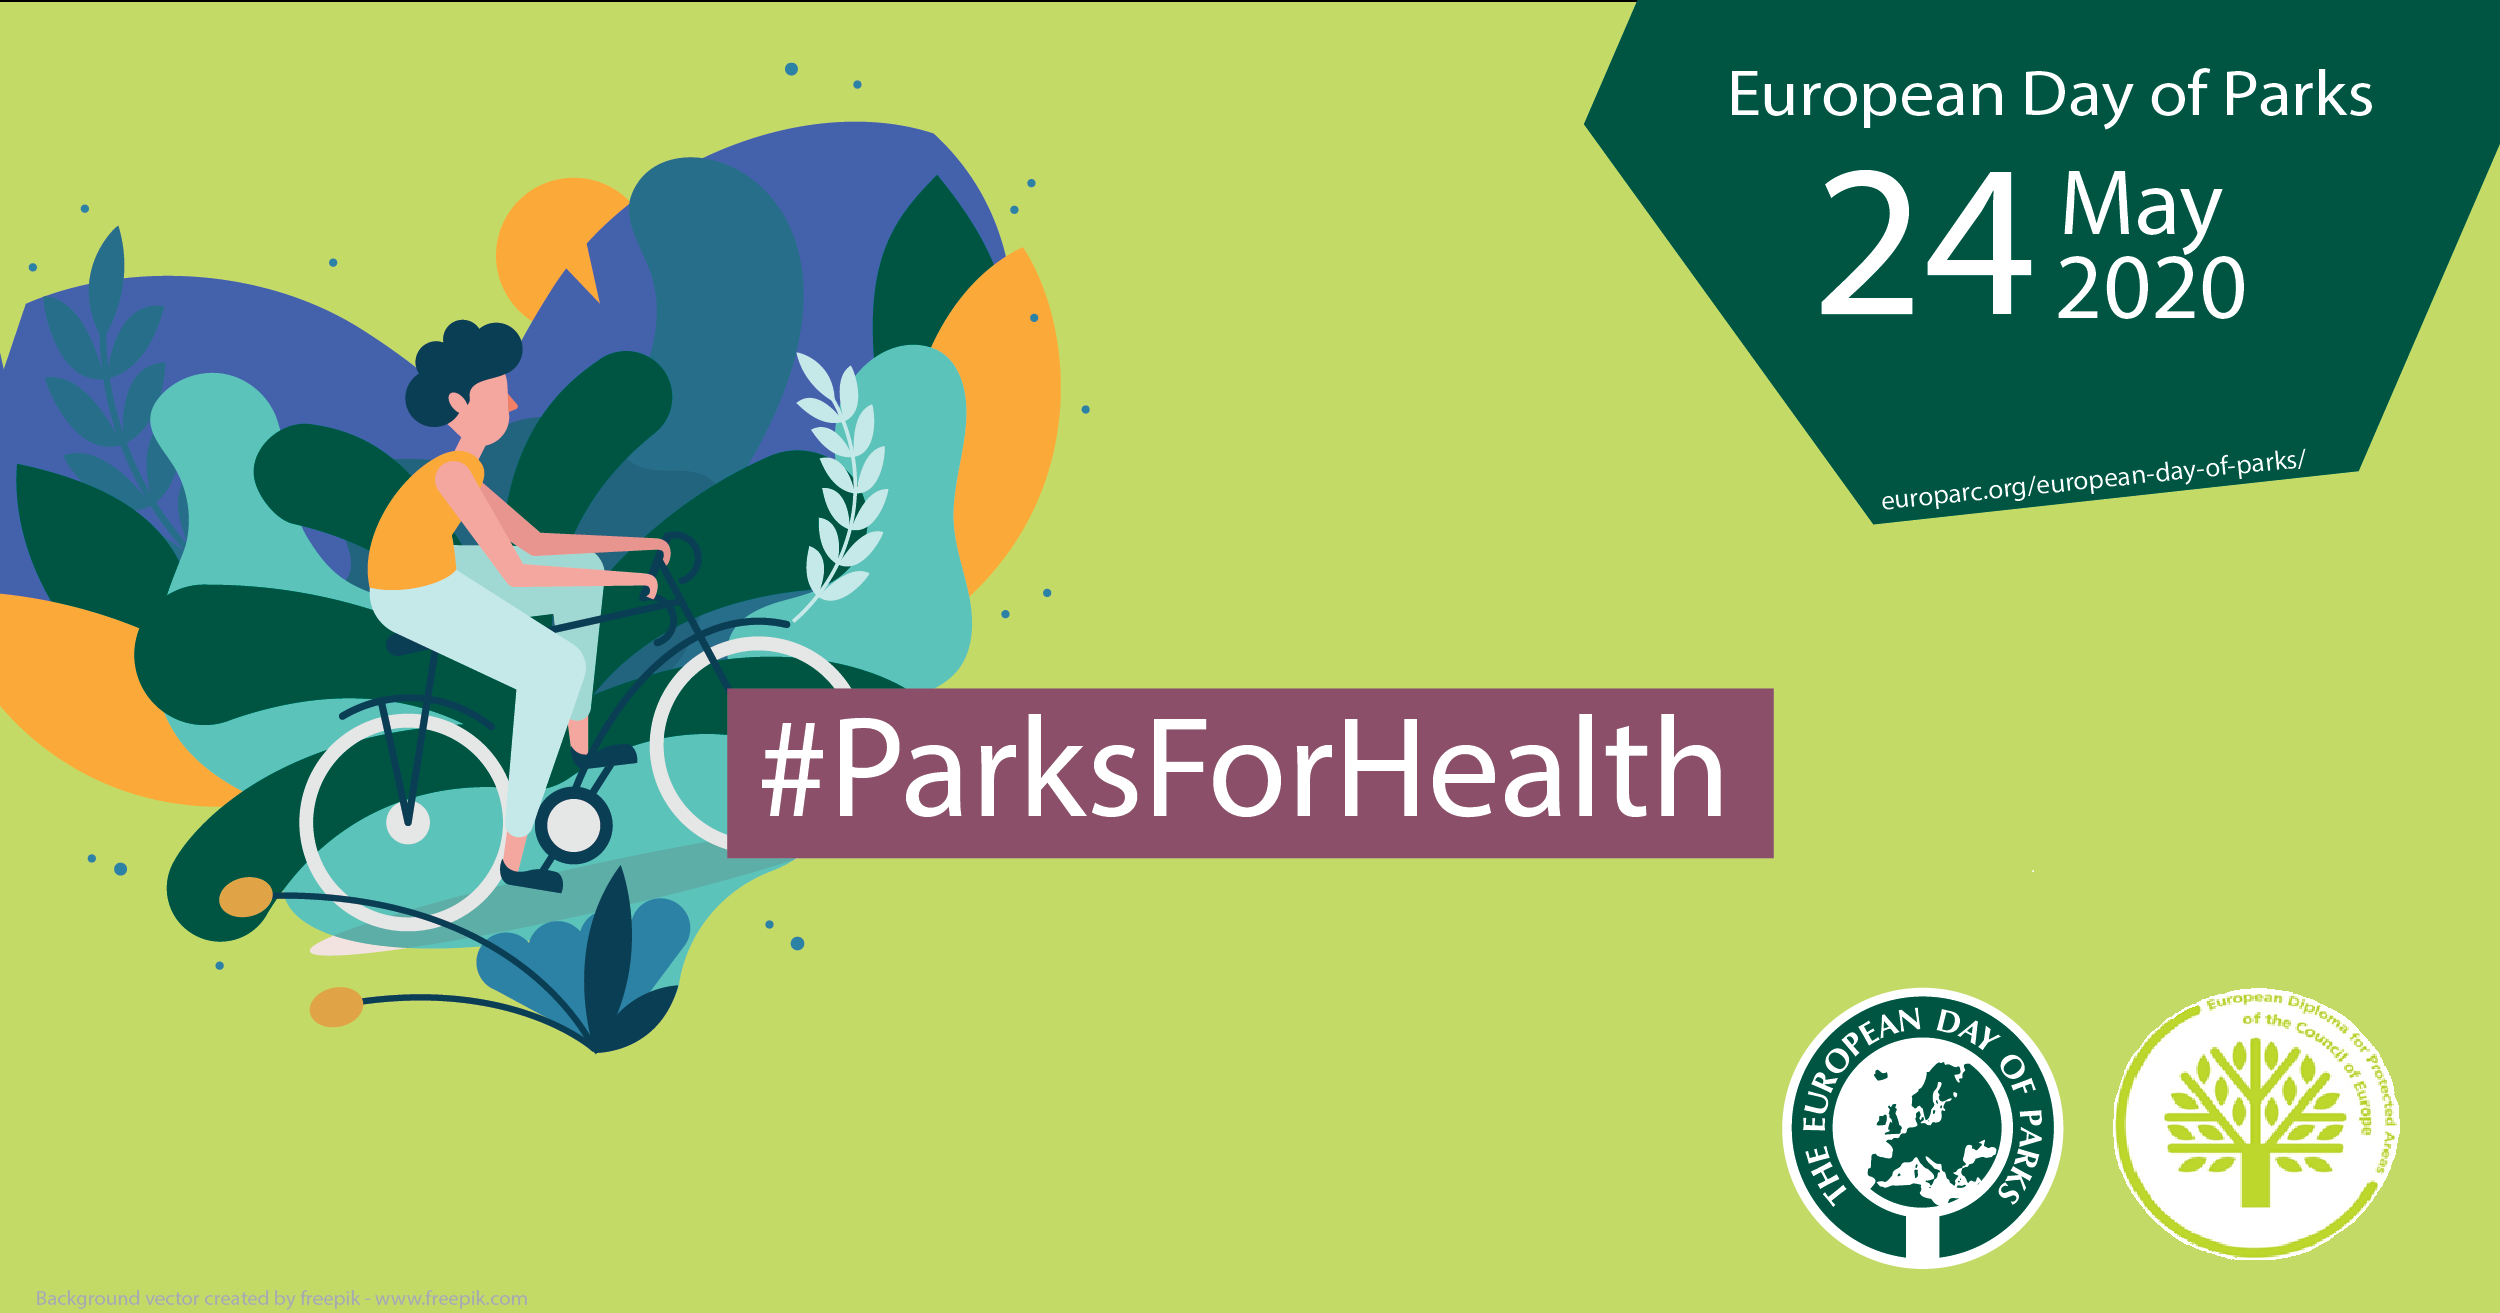 The European Diploma for Protected Areas celebrates the European Day of Parks 2020